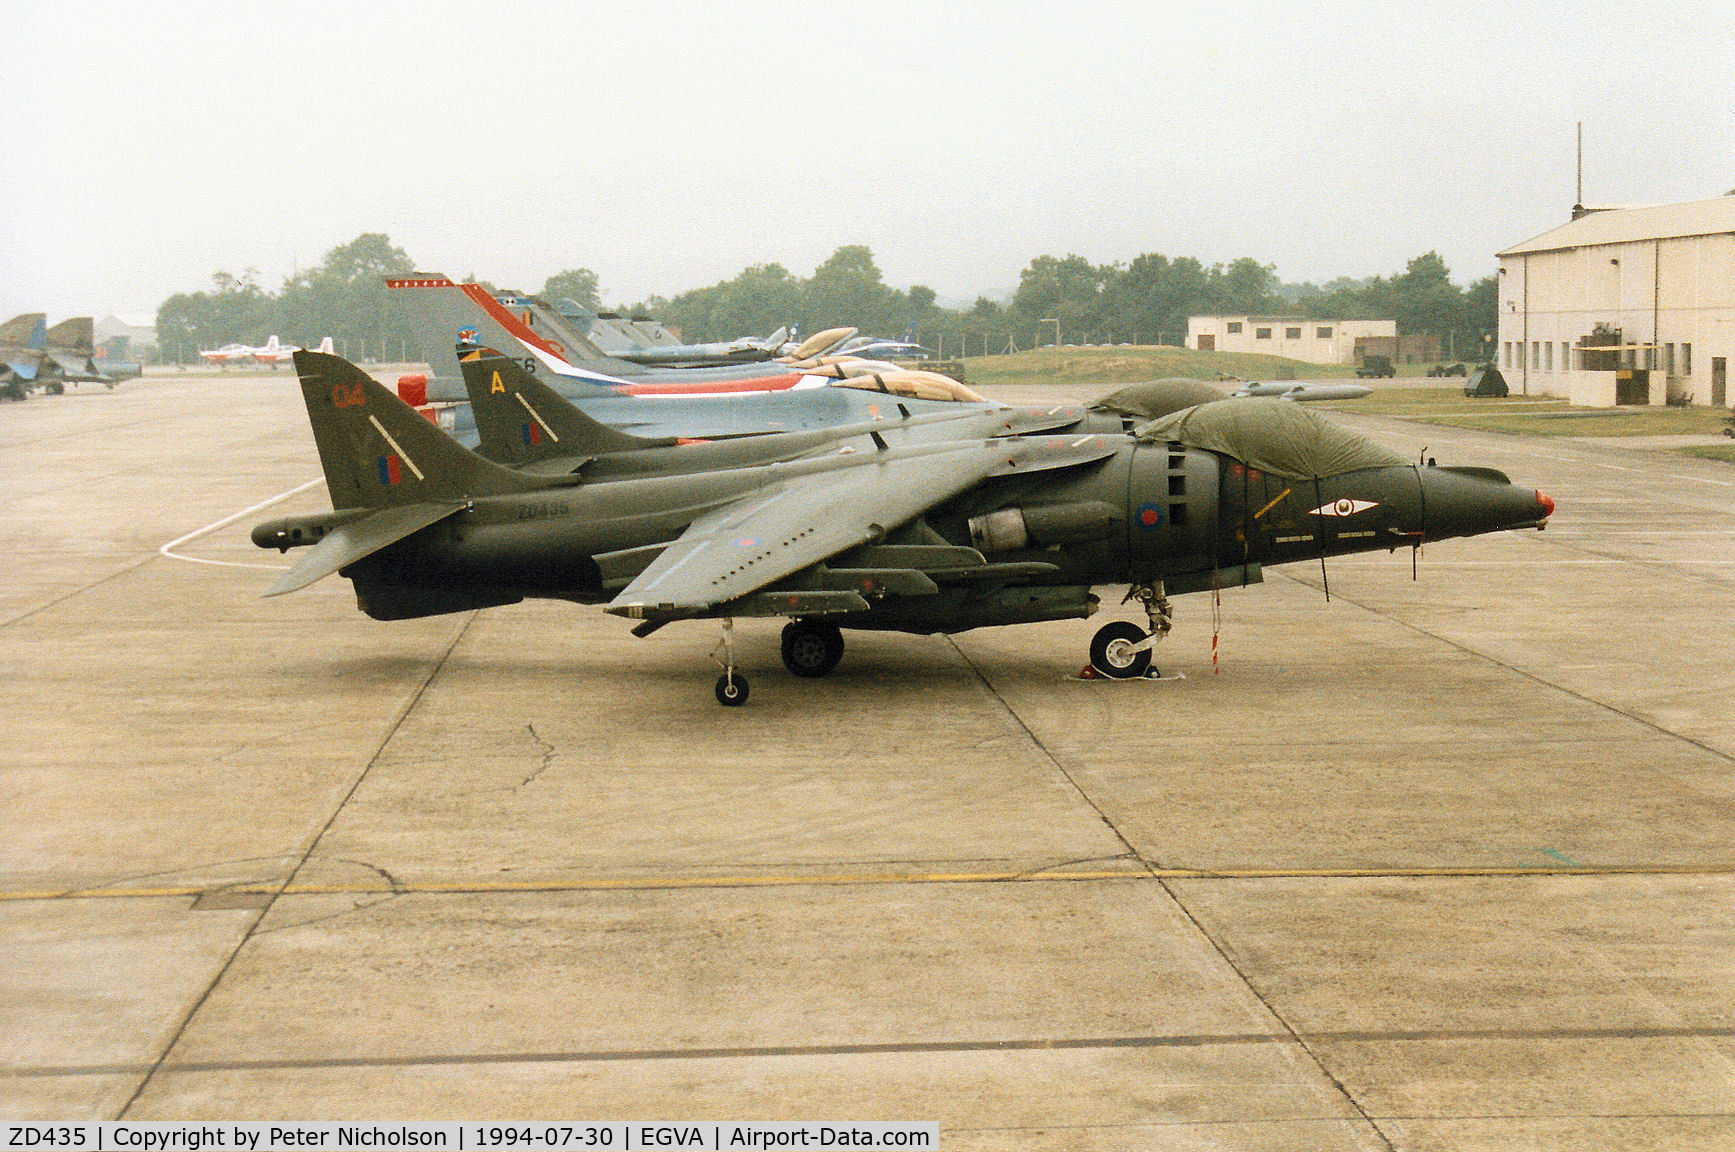 ZD435, 1989 British Aerospace Harrier GR.7 C/N P47, Another view of the Harrier GR.7 of 1 Squadron at RAF Wittering on the flight-line at the 1994 Intnl Air Tattoo at RAF Fairford.